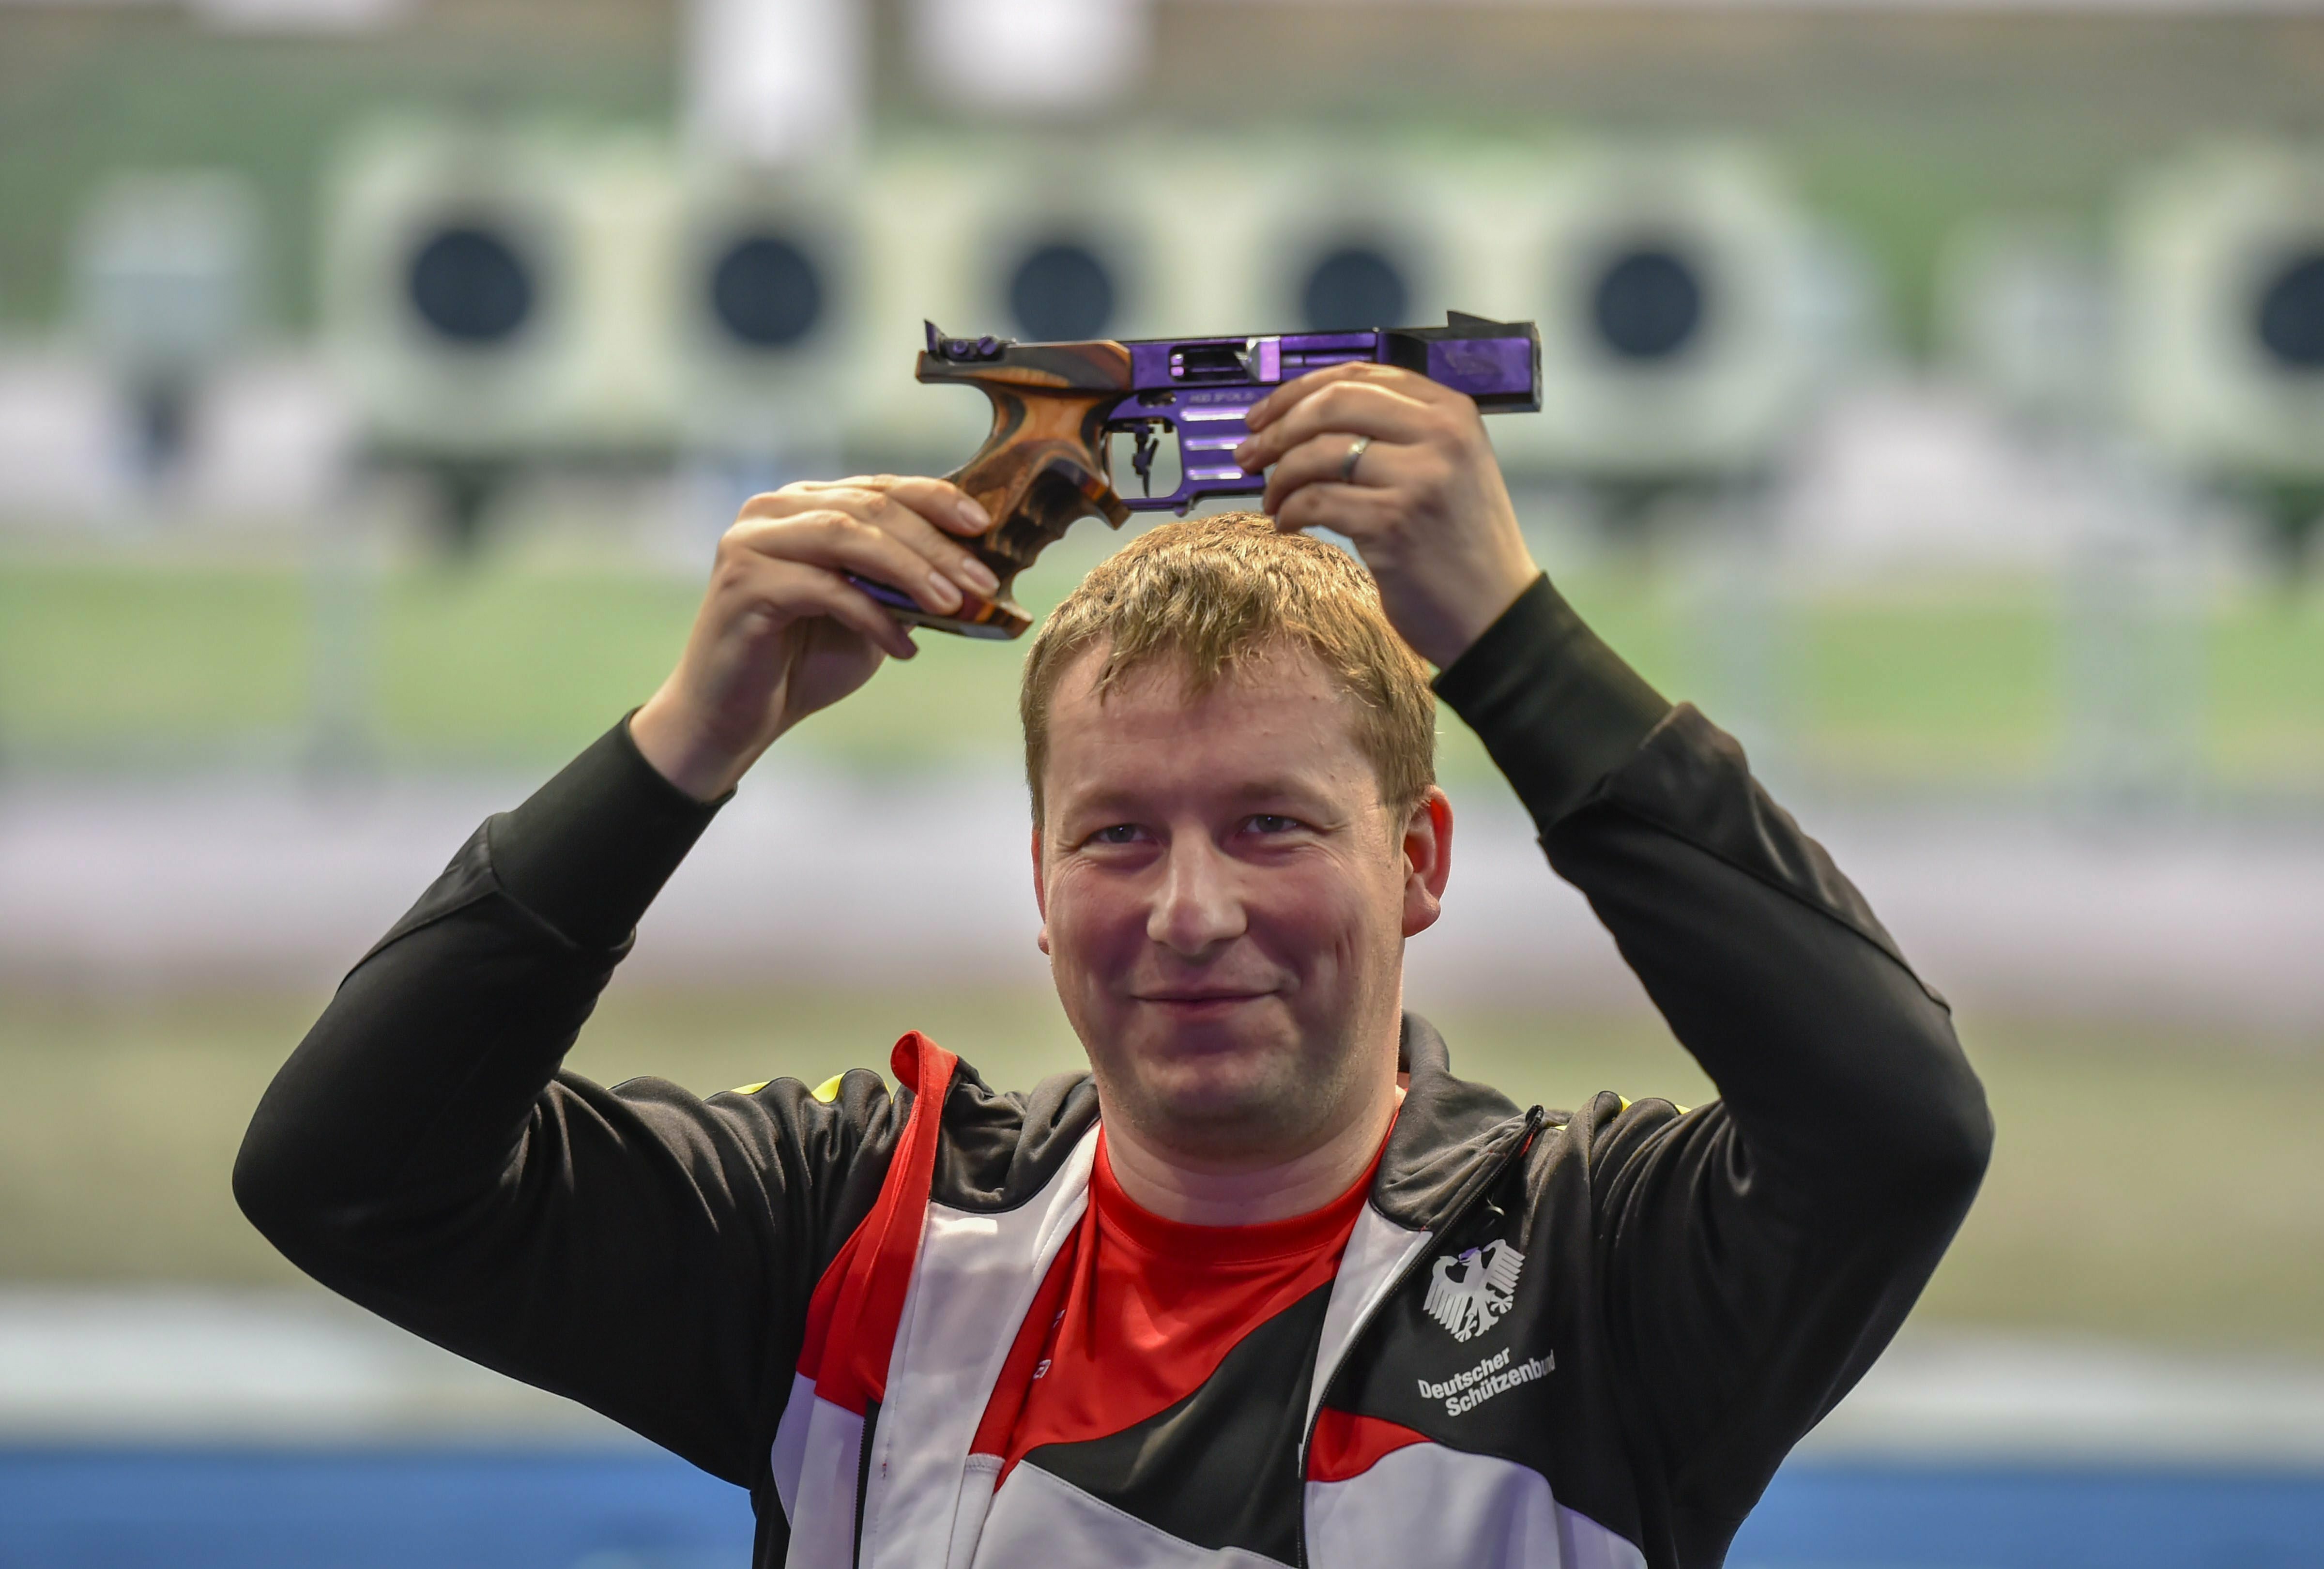 German shooter Christian Reitz celebrates after winning the men's 25m rapid fire pistol final shooting event of ISSF World Cup Rifle/Pistol, at Dr Karni Singh Shooting Range in New Delhi - PTI